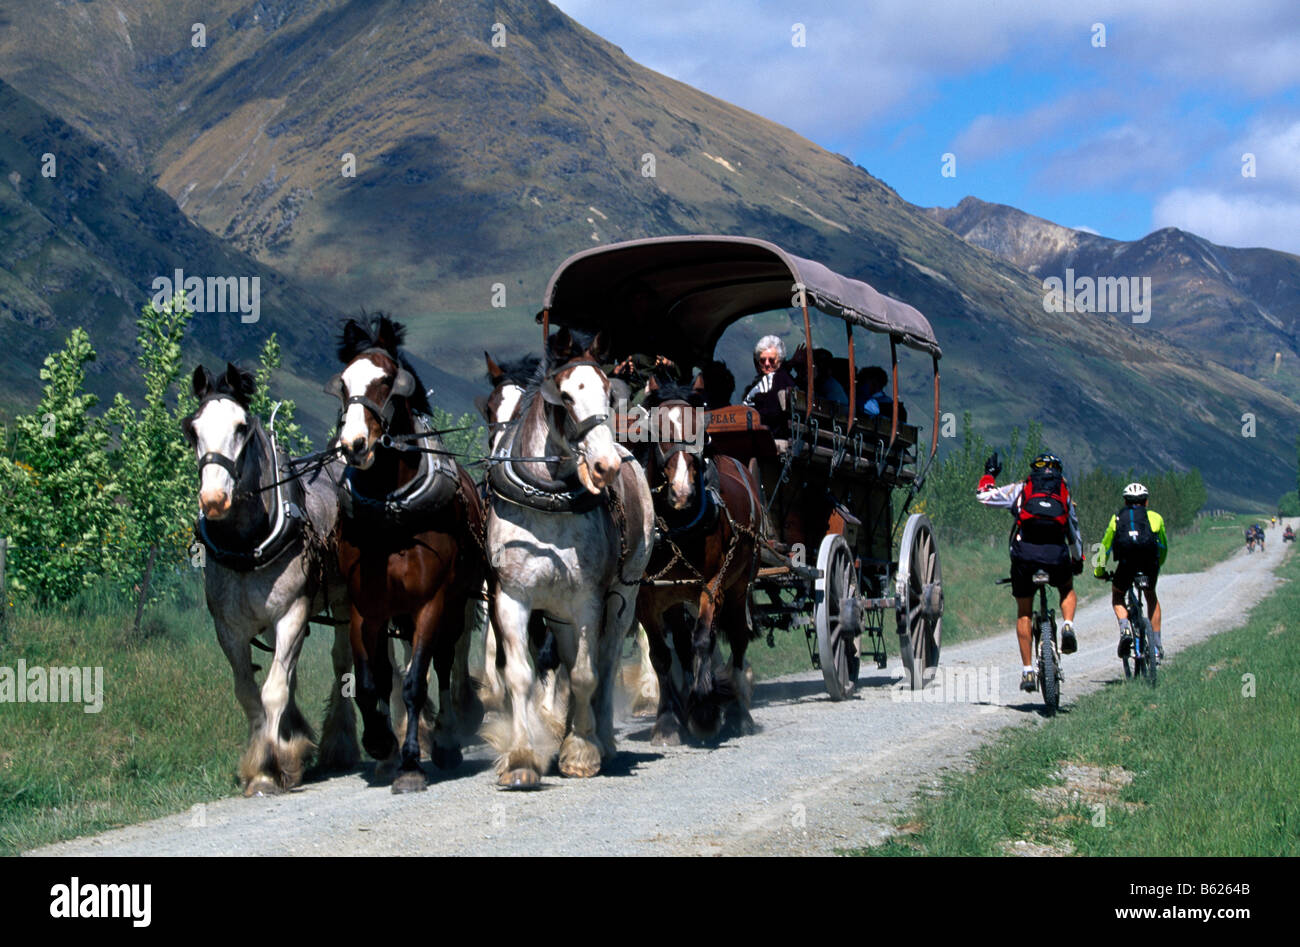 Mountainbikers passing a horse drawn carriage, Lake Wakatipu, Queenstown, South Island, New Zealand Stock Photo